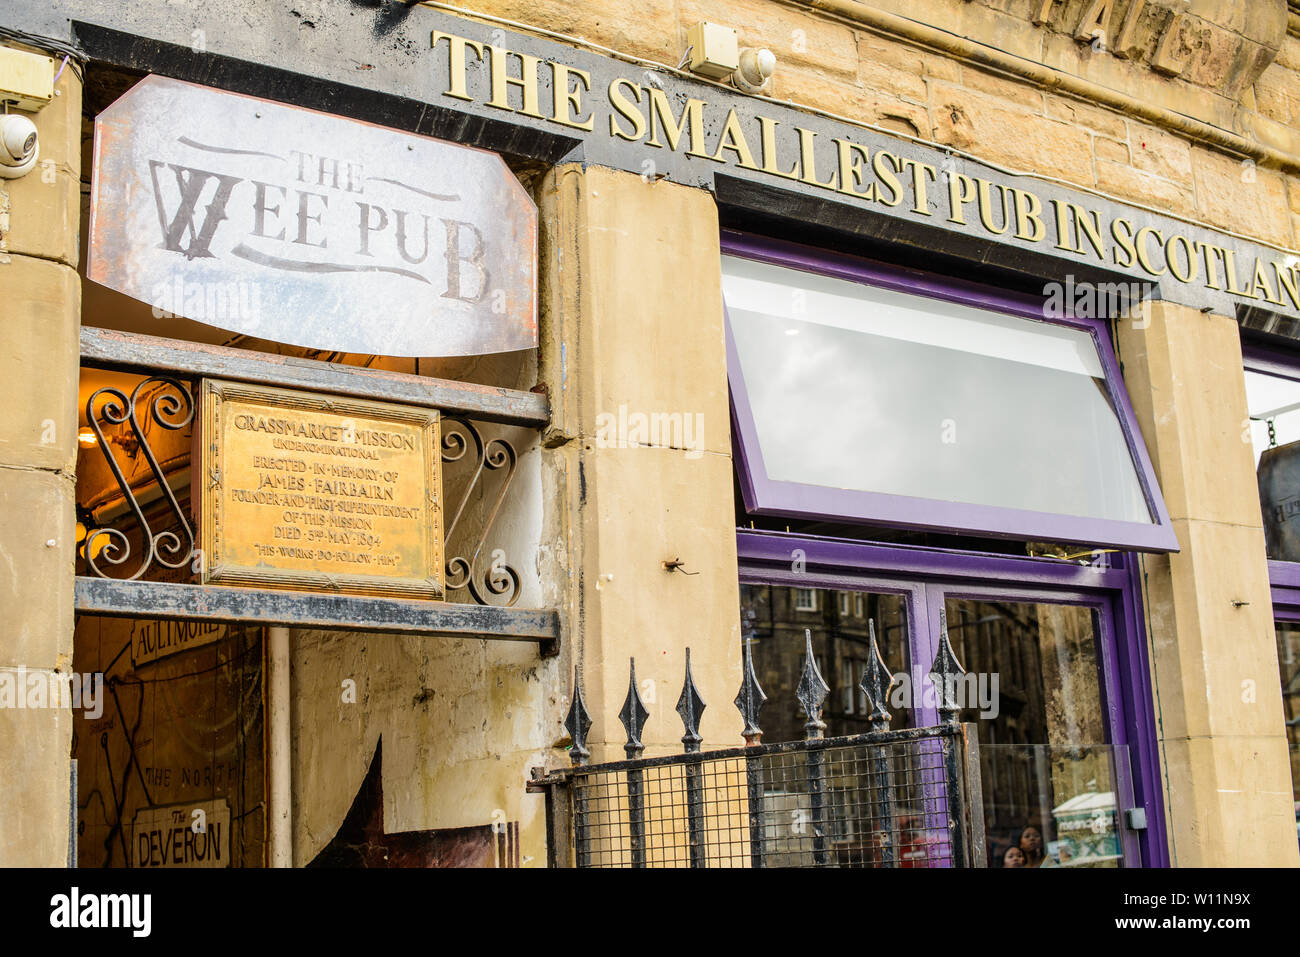 The Wee Pub, in Grassmarket, Edinburgh Old Town, claims to be the smallest pub in Scotland. Stock Photo